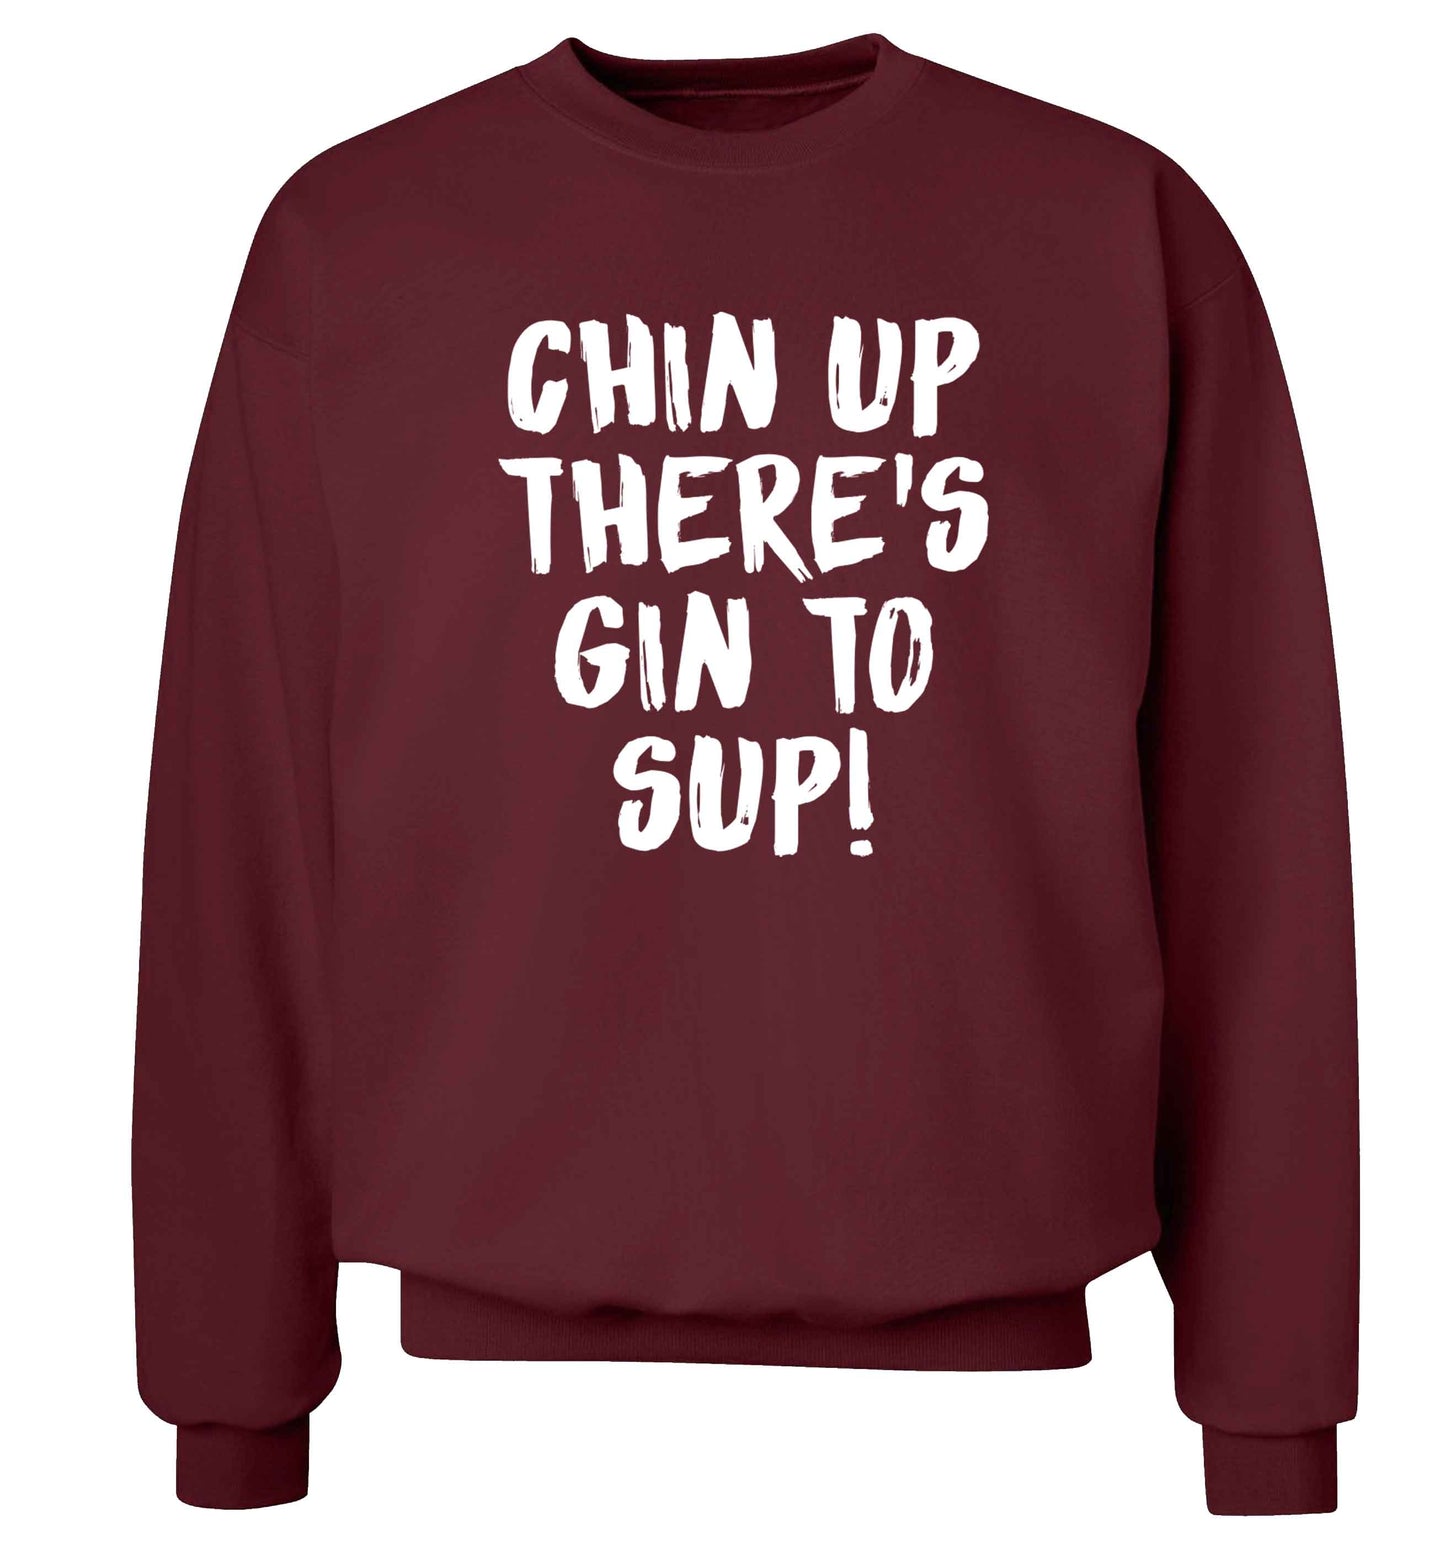 Chin up there's gin to sup Adult's unisex maroon Sweater 2XL